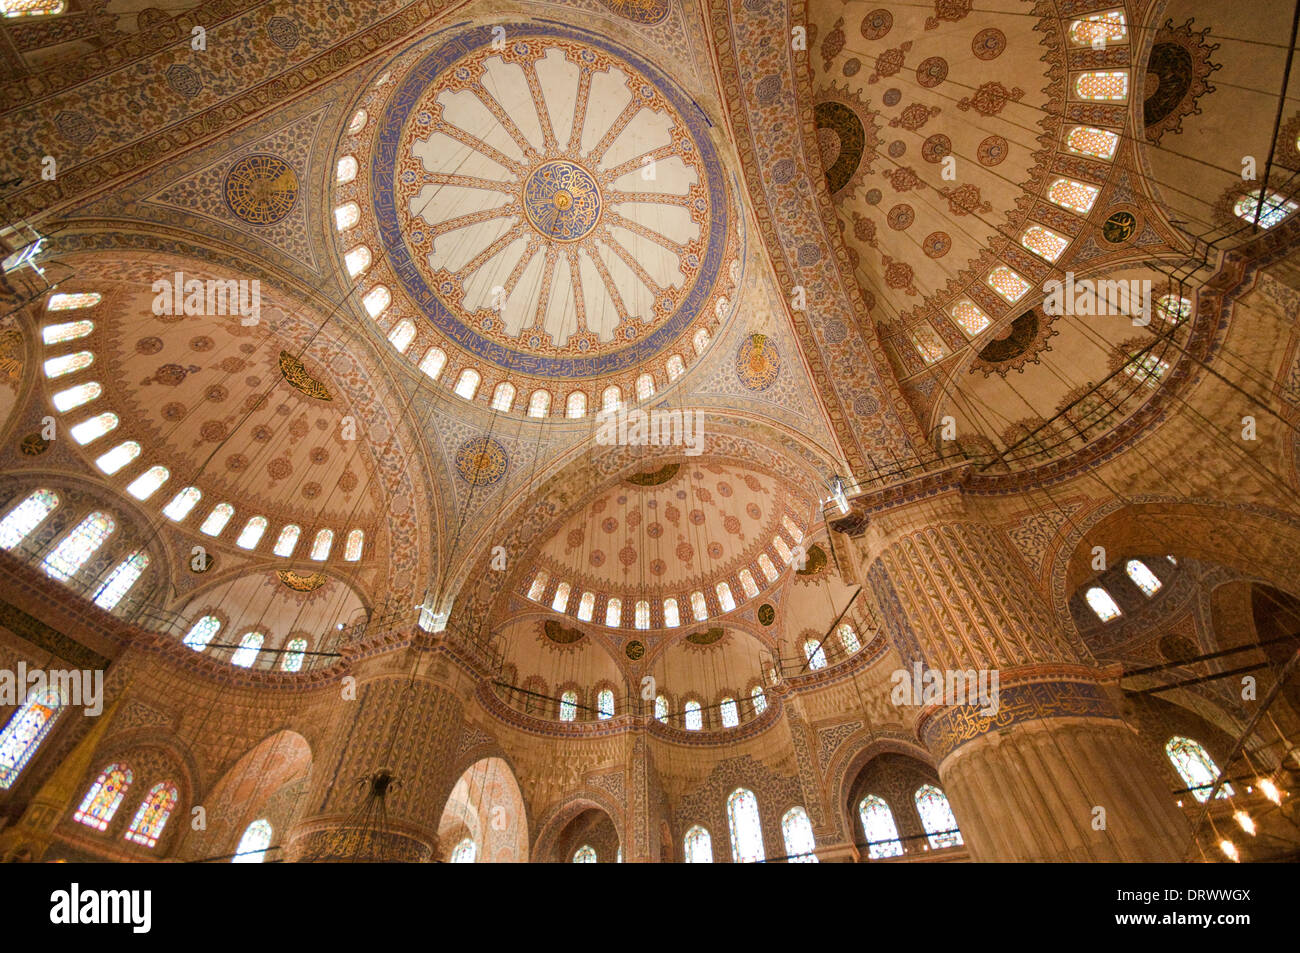 EUROPE/ASIA, Turkey, Istanbul, interior of Blue Mosque (1606-1616), constructed by Sultan Ahmet I, featuring ceiling decoration Stock Photo